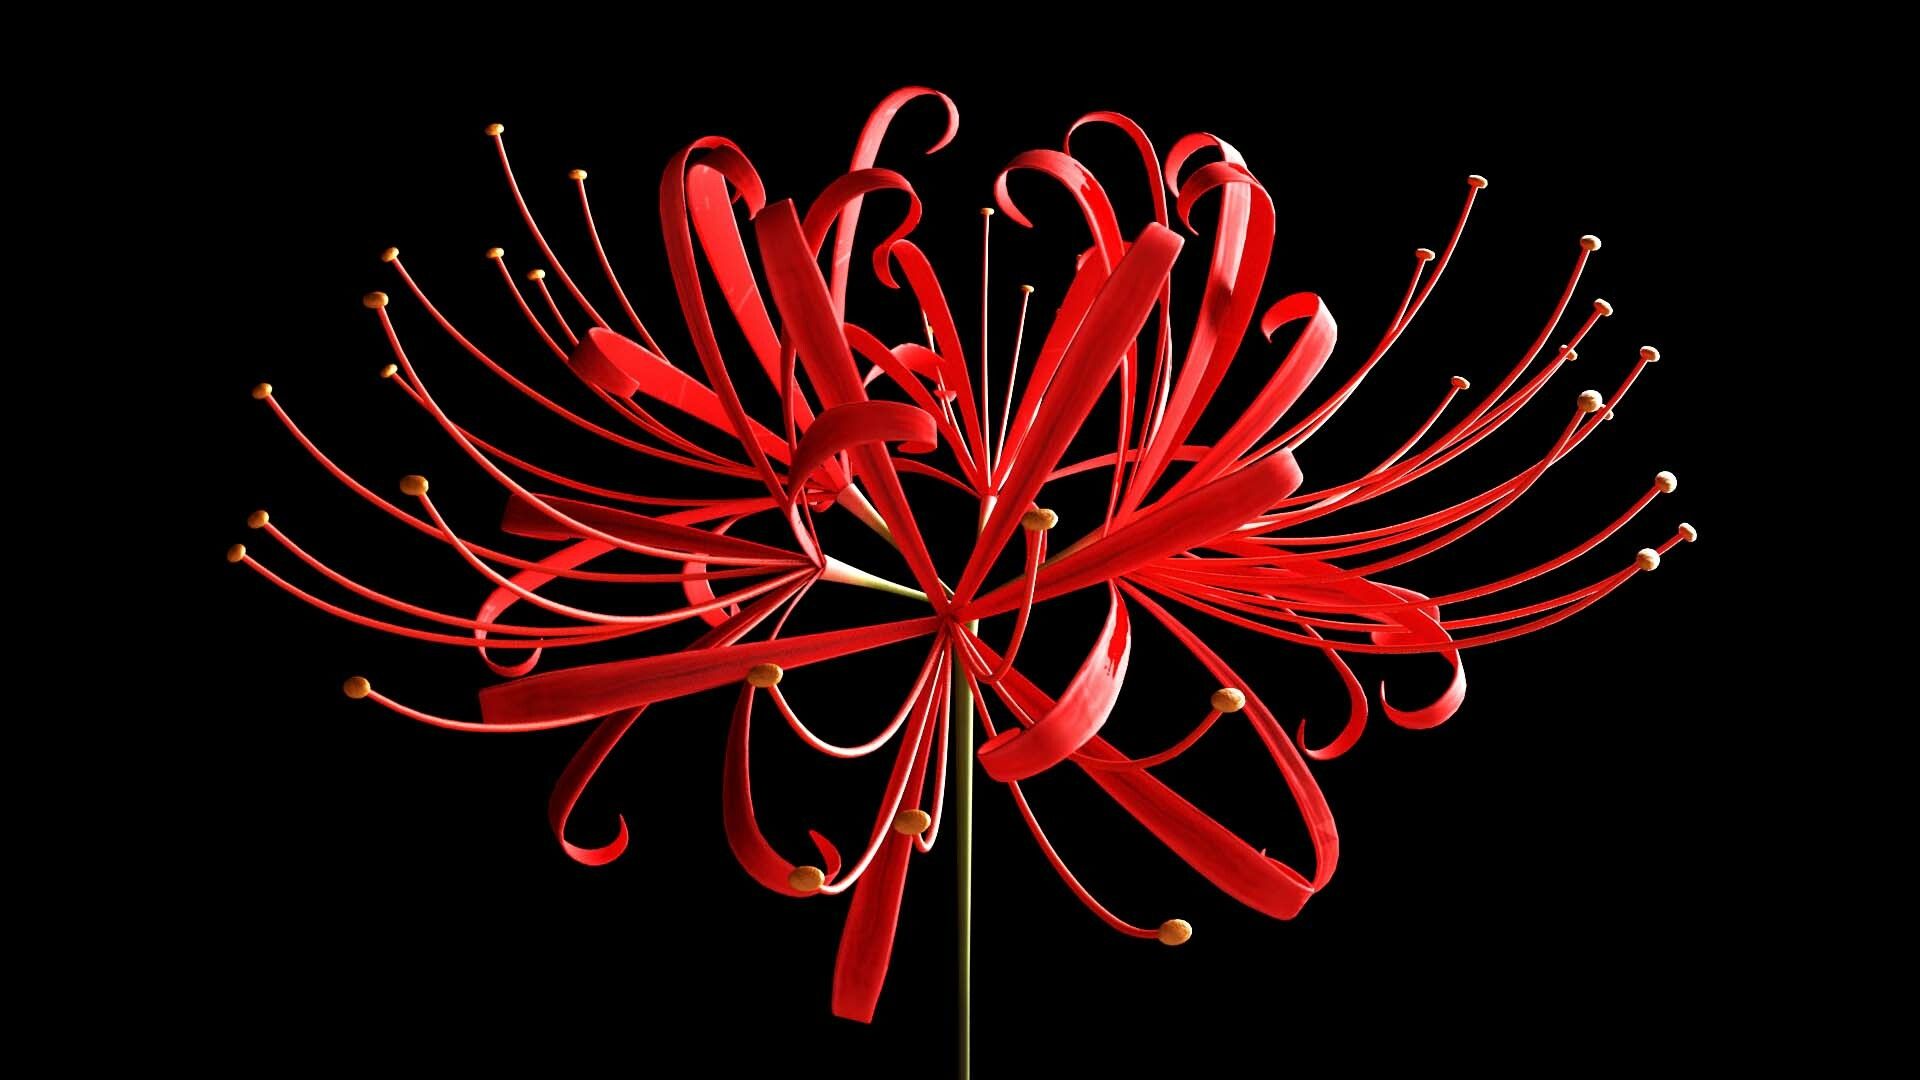 Higanbana Various meanings of the red spider lily and where to view it in  Japan  grape Japan